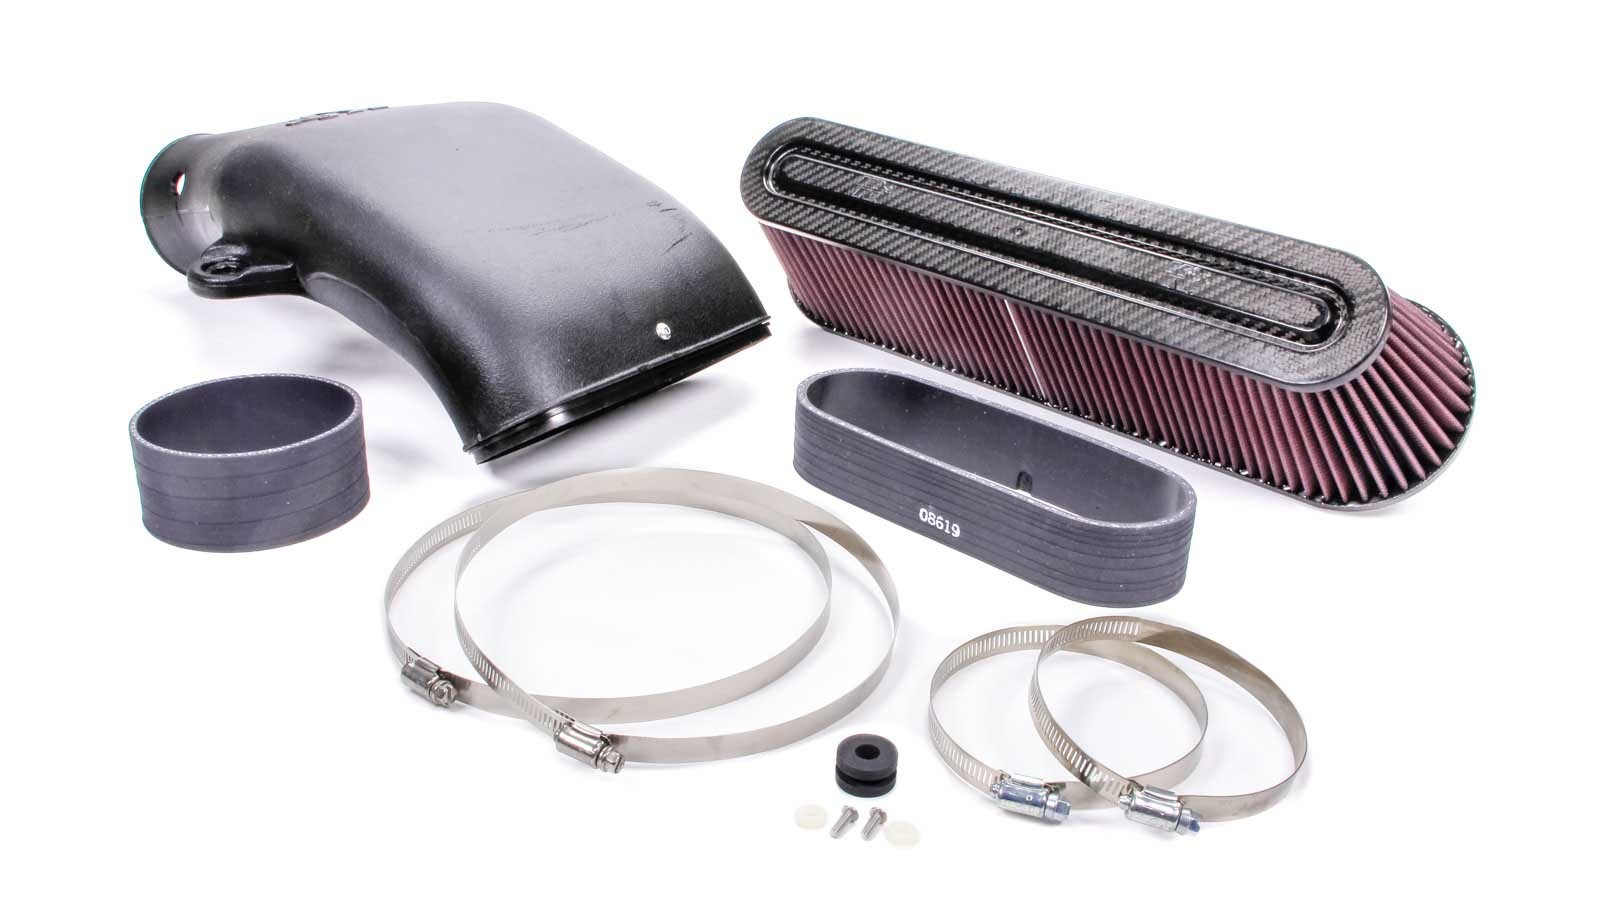 K & N Air Induction System, 63 Series AirCharger, Reusable Filter, Chevy Corvette Z06 2006-09, Kit